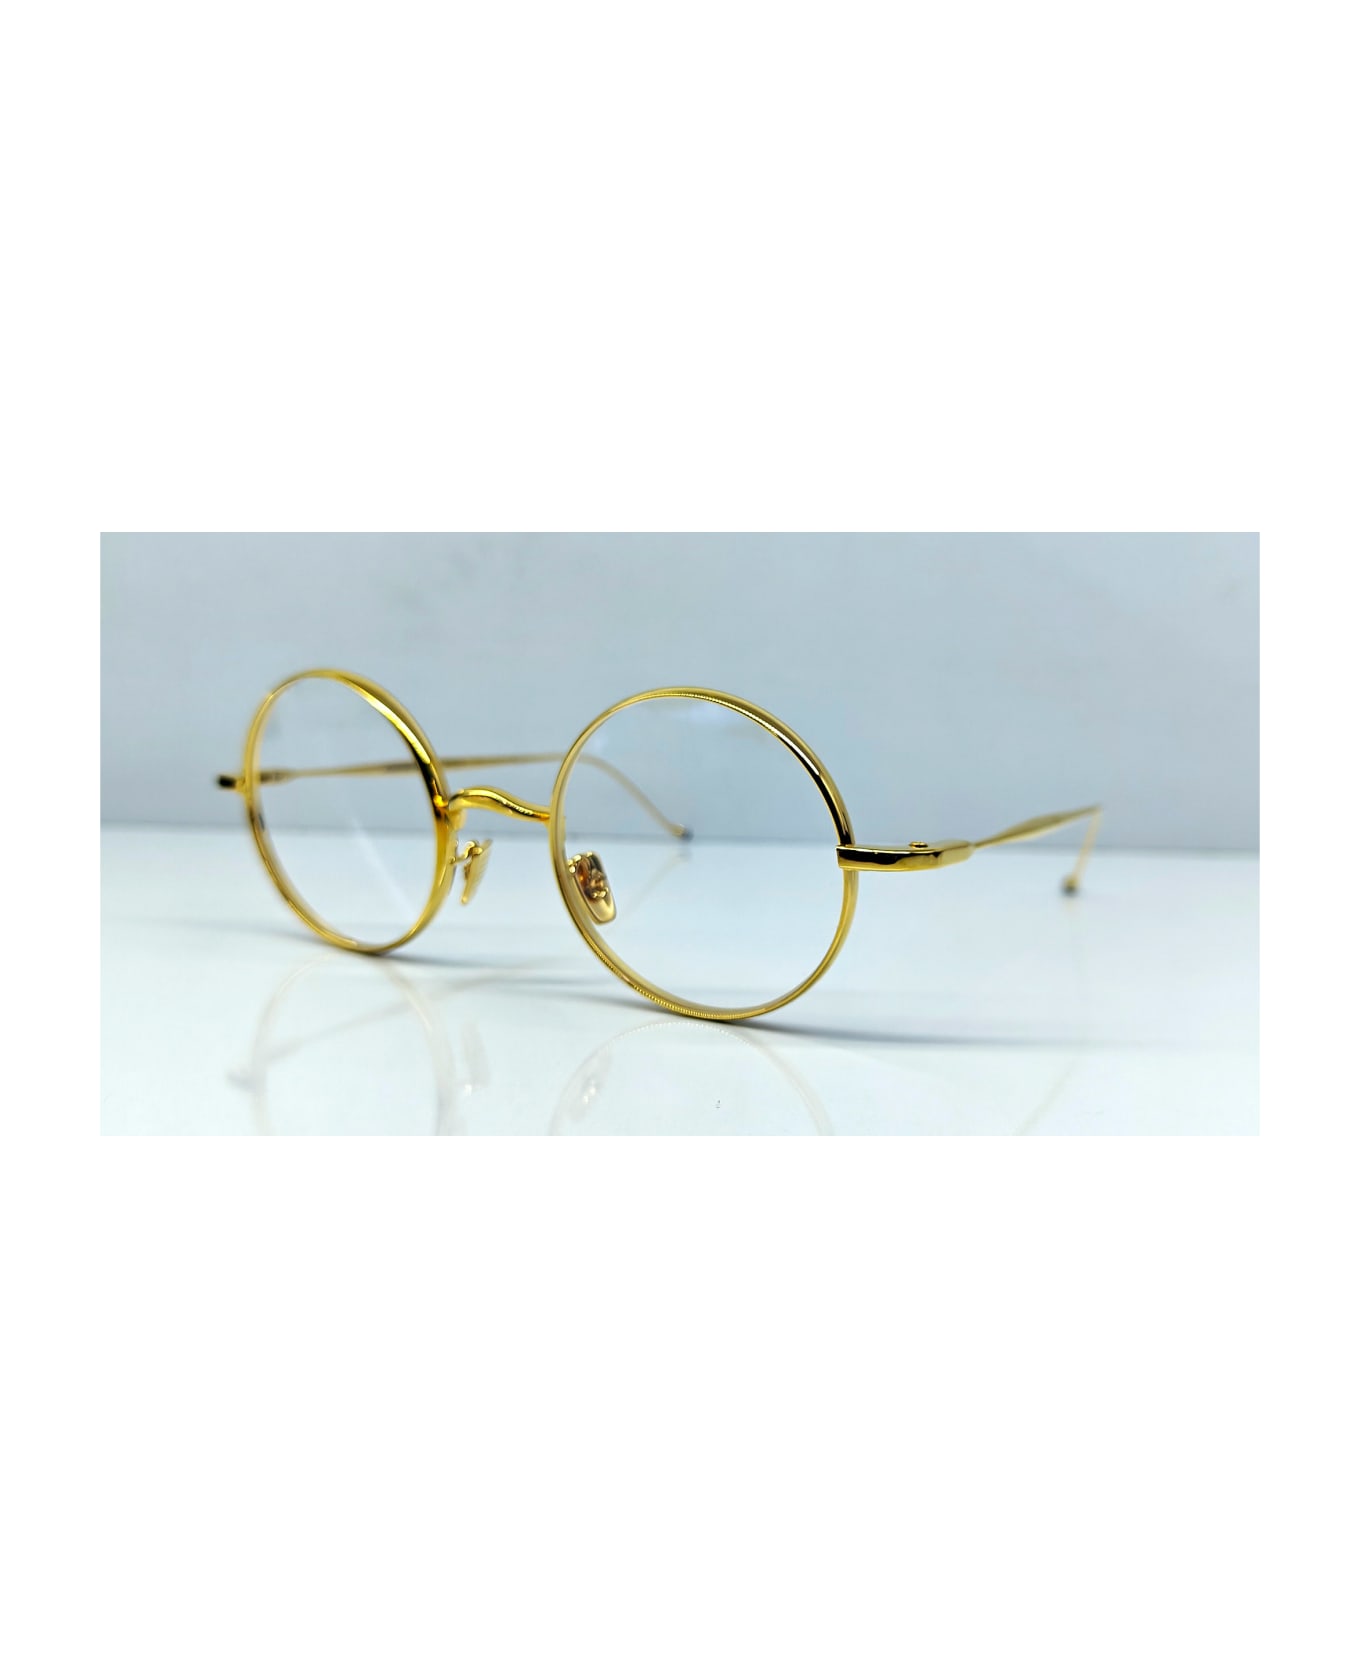 Jacques Marie Mage Diana - Gold Rx Glasses - Gold アイウェア